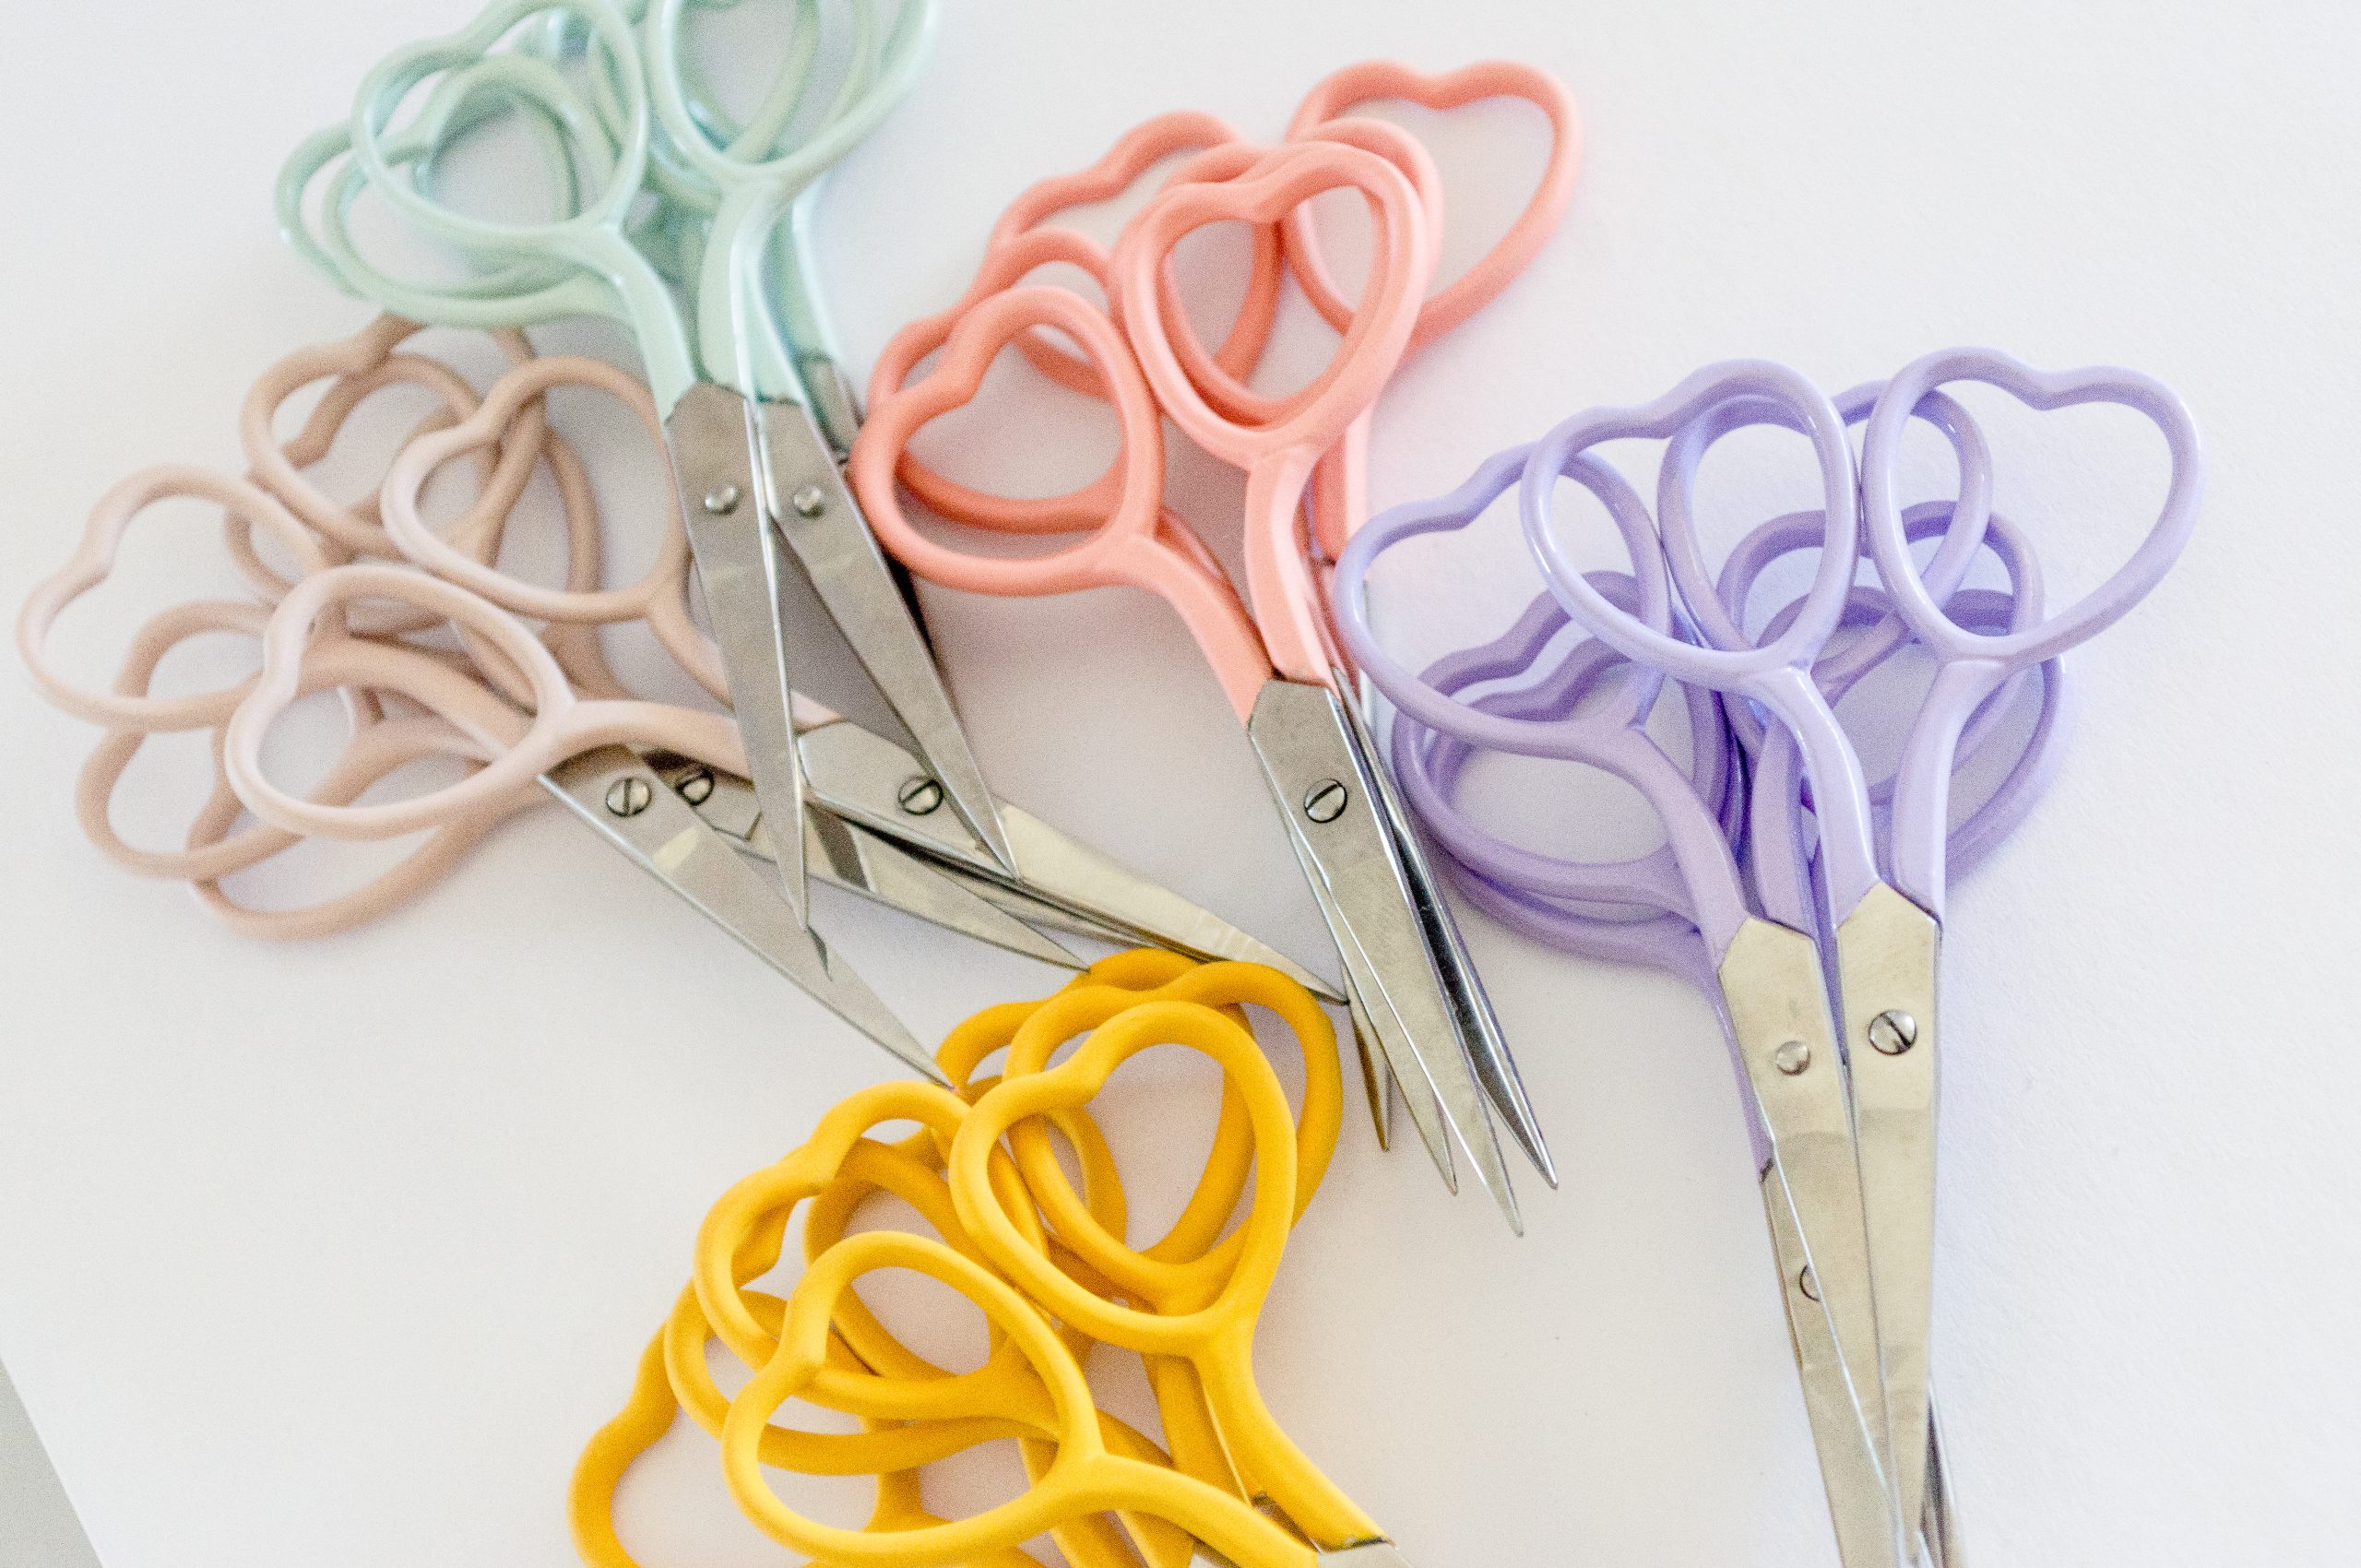 Holiday Embroidery Scissors – Brooklyn Craft Company